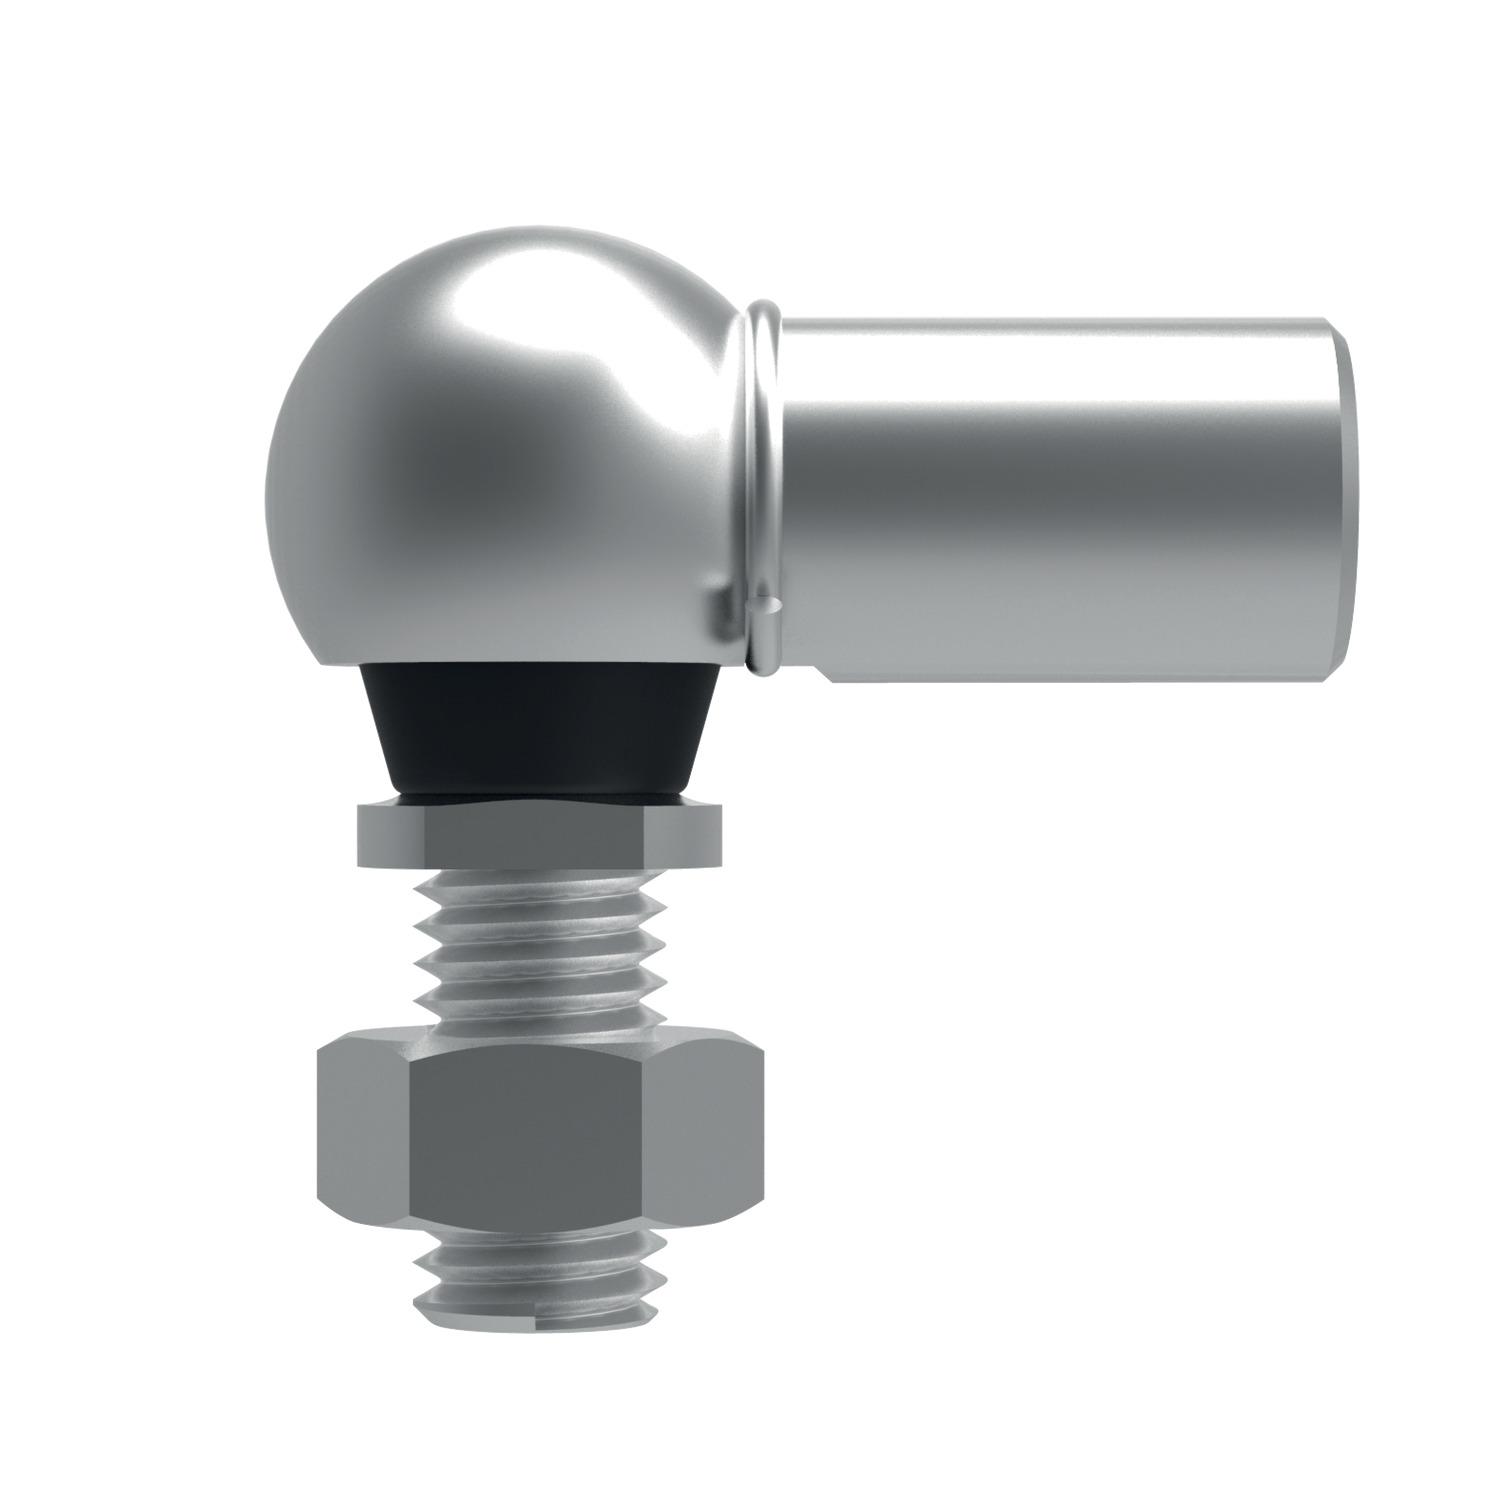 Ball and Socket Joints ZP steel ball and socket joint with rubber protection gaitor.